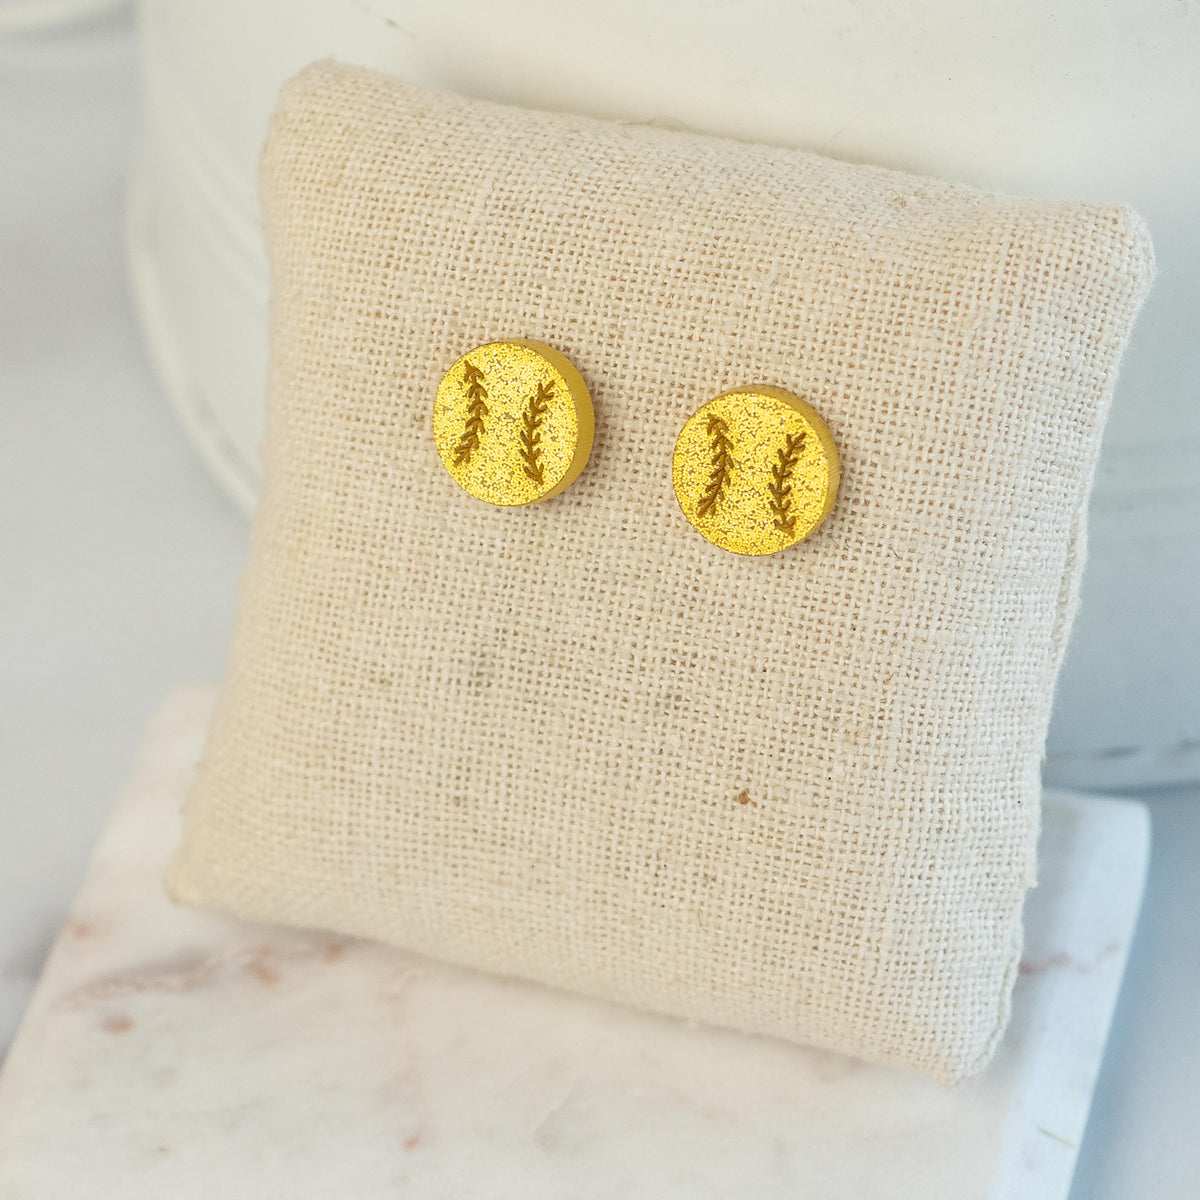 Softball Stud Earrings in Gold Glitter--Lemons and Limes Boutique